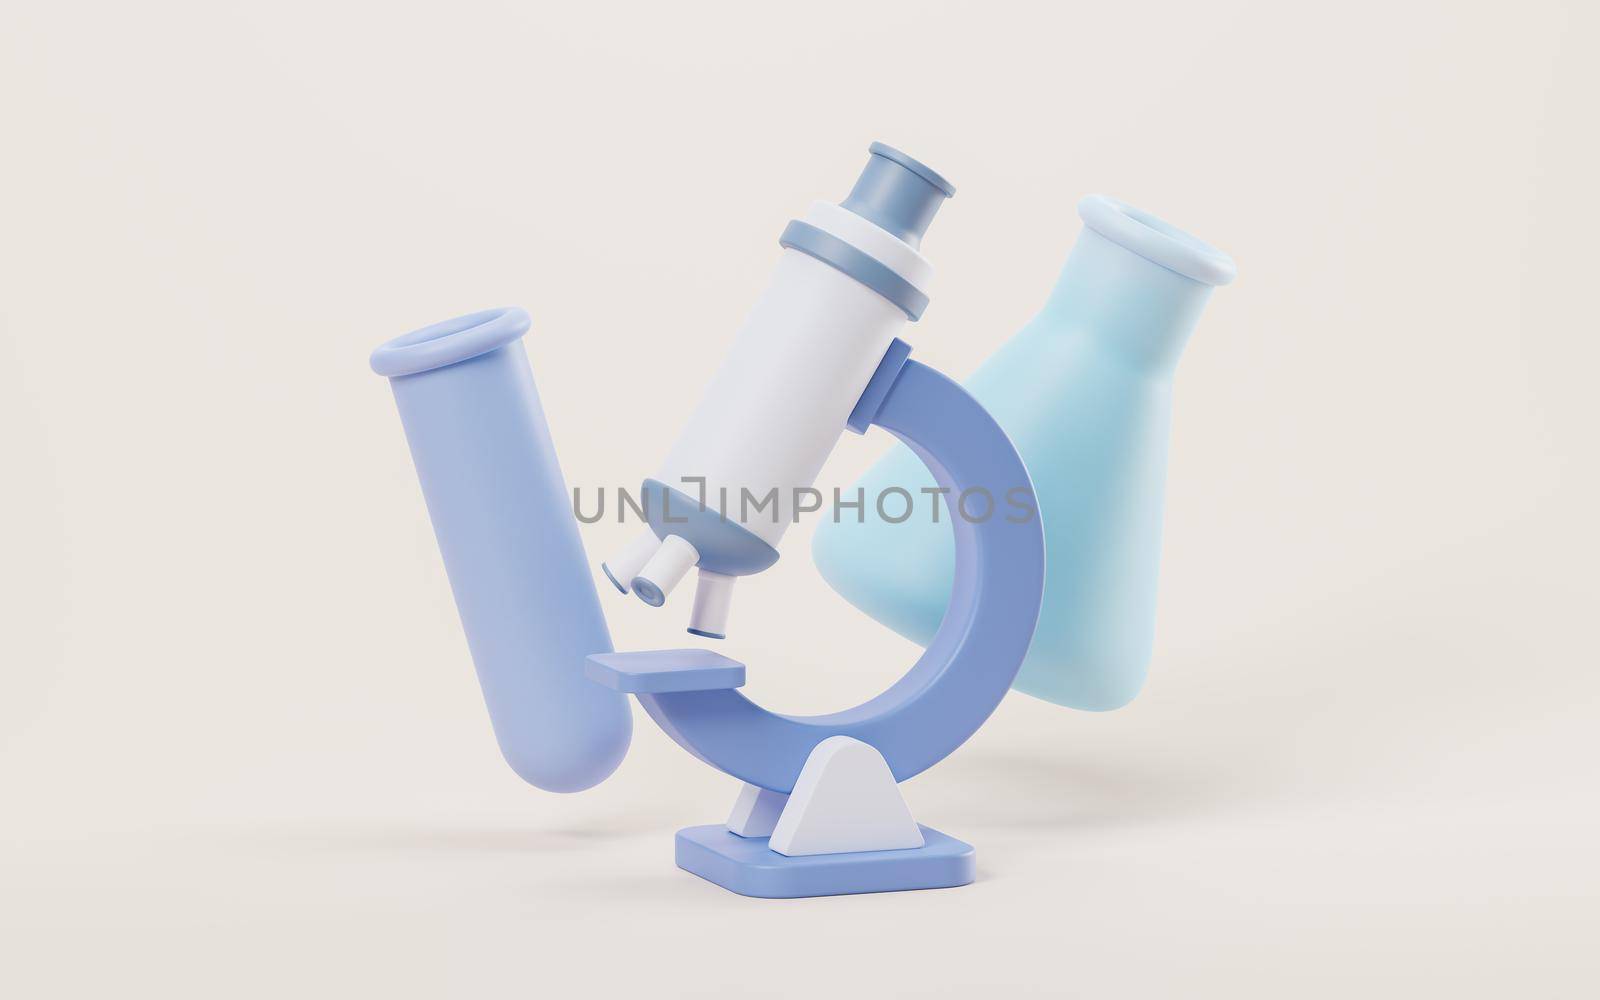 3D cartoon style microscope and chemical vessel, 3d rendering. Computer digital drawing.